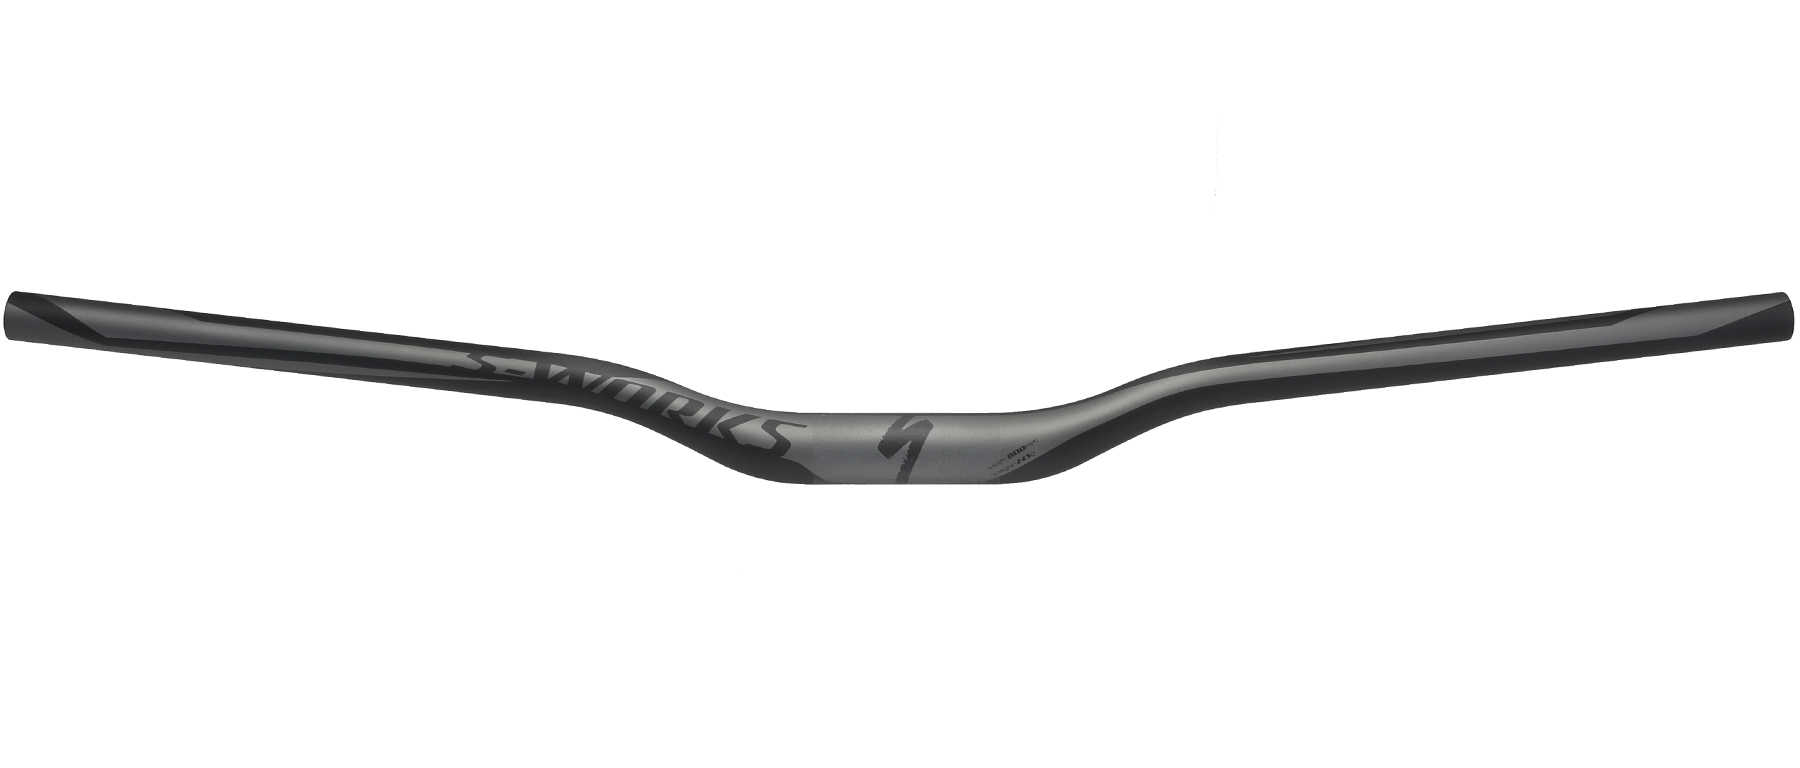 Specialized S-Works DH Carbon Bar